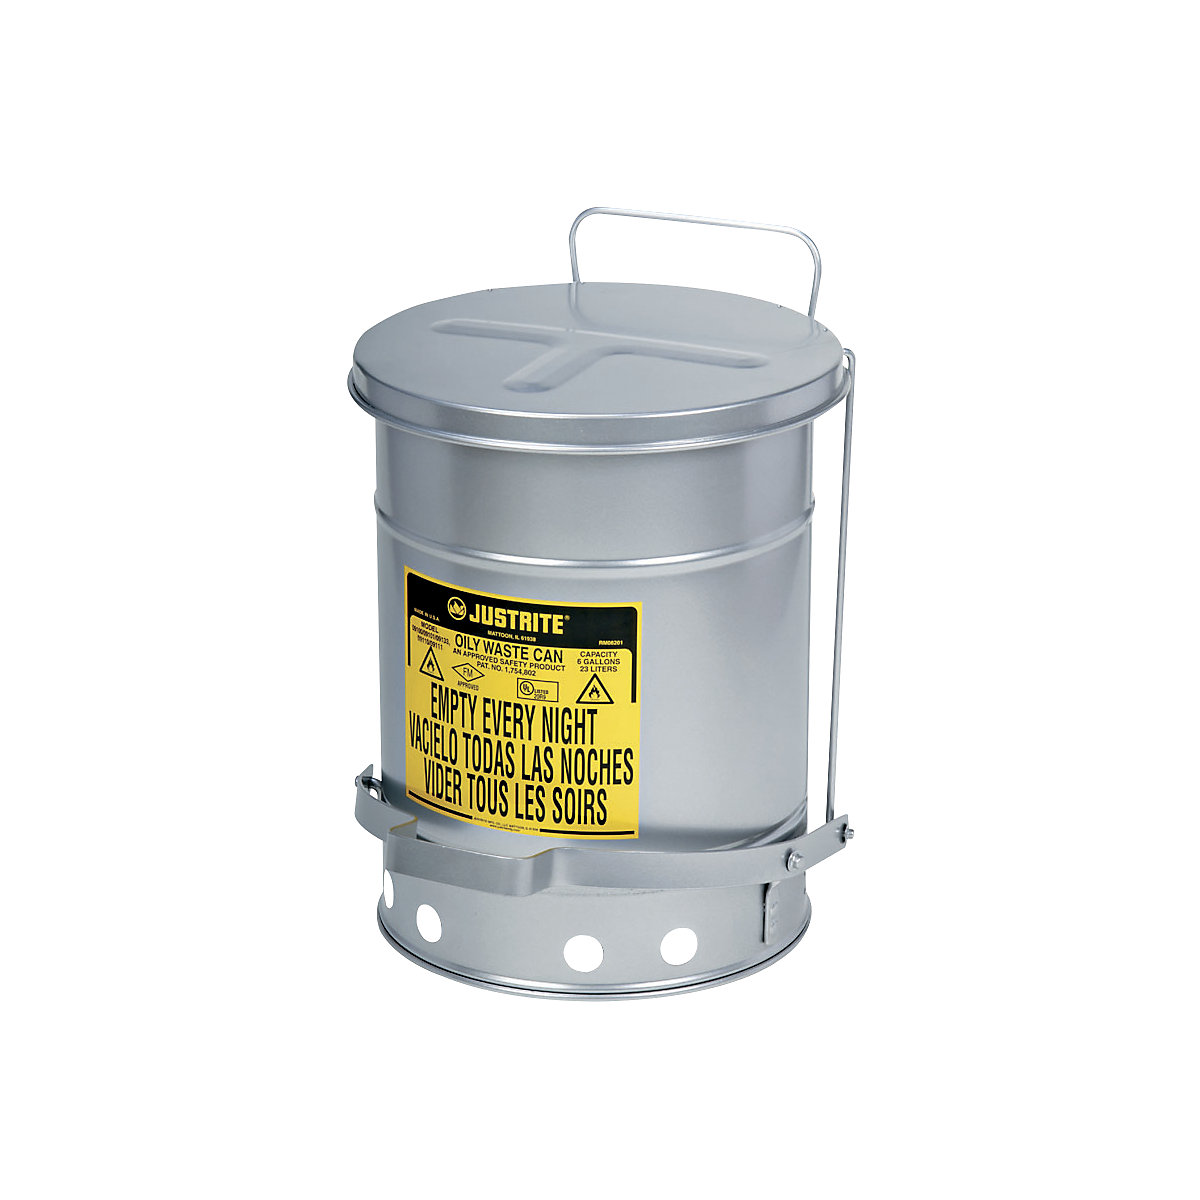 Low noise SoundGard™ safety disposal cans – Justrite, lid closes softly and quietly, painted silver, capacity 34 l-6